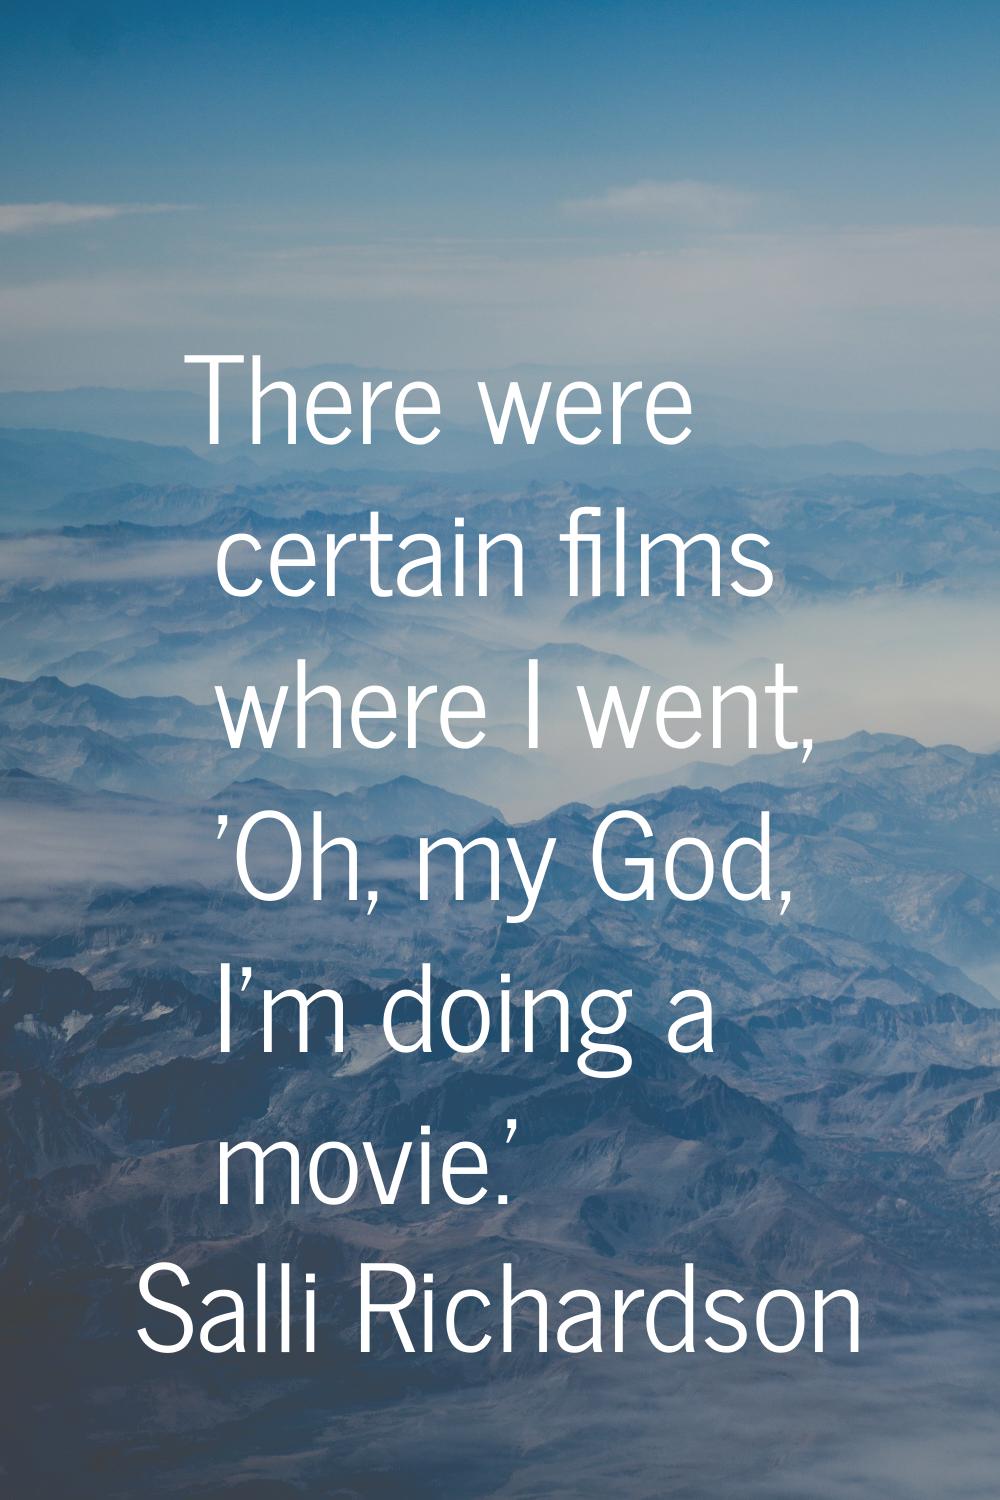 There were certain films where I went, 'Oh, my God, I'm doing a movie.'